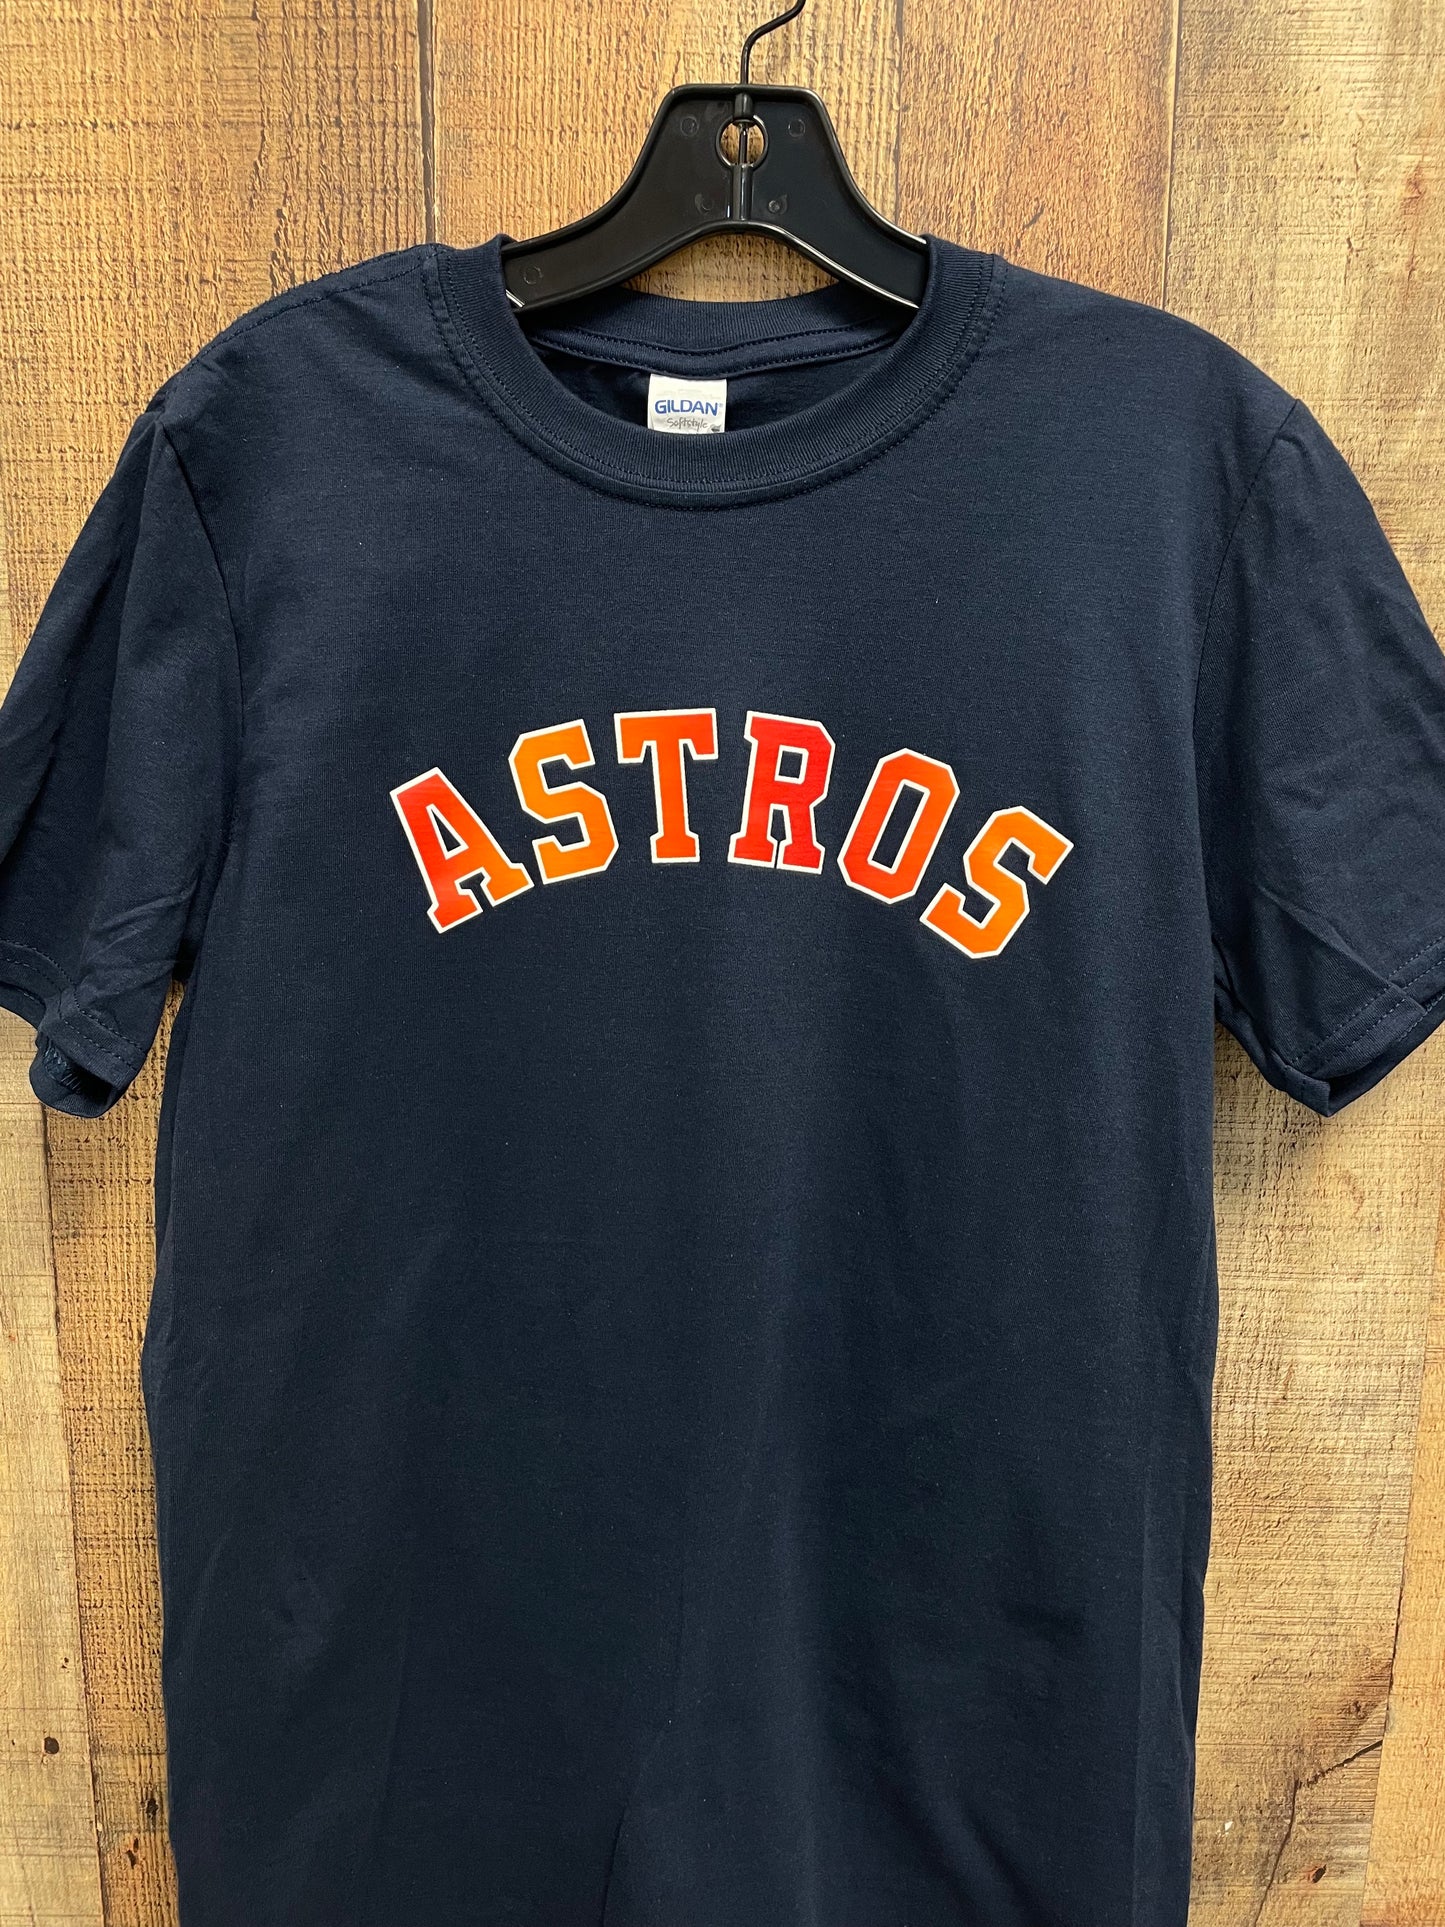 Completed Houston Astros Tee